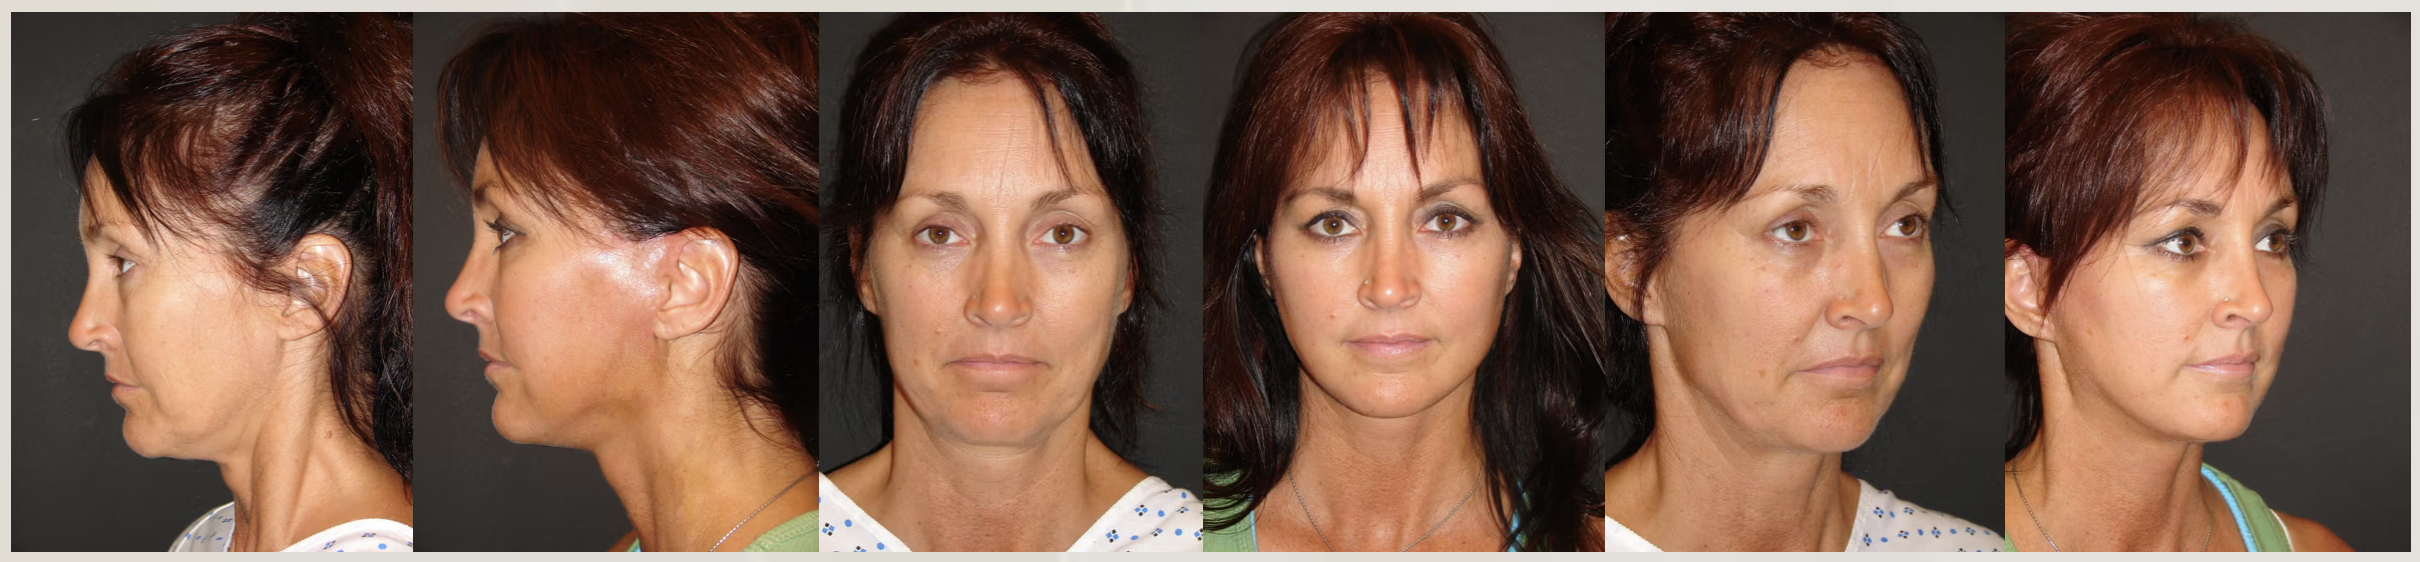 At Mommy Makeover Tijuana a facelift is a surgical procedure that involves lifting, trimming, and tightening the skin and tissues of the lower face and neck via discreet incisions.